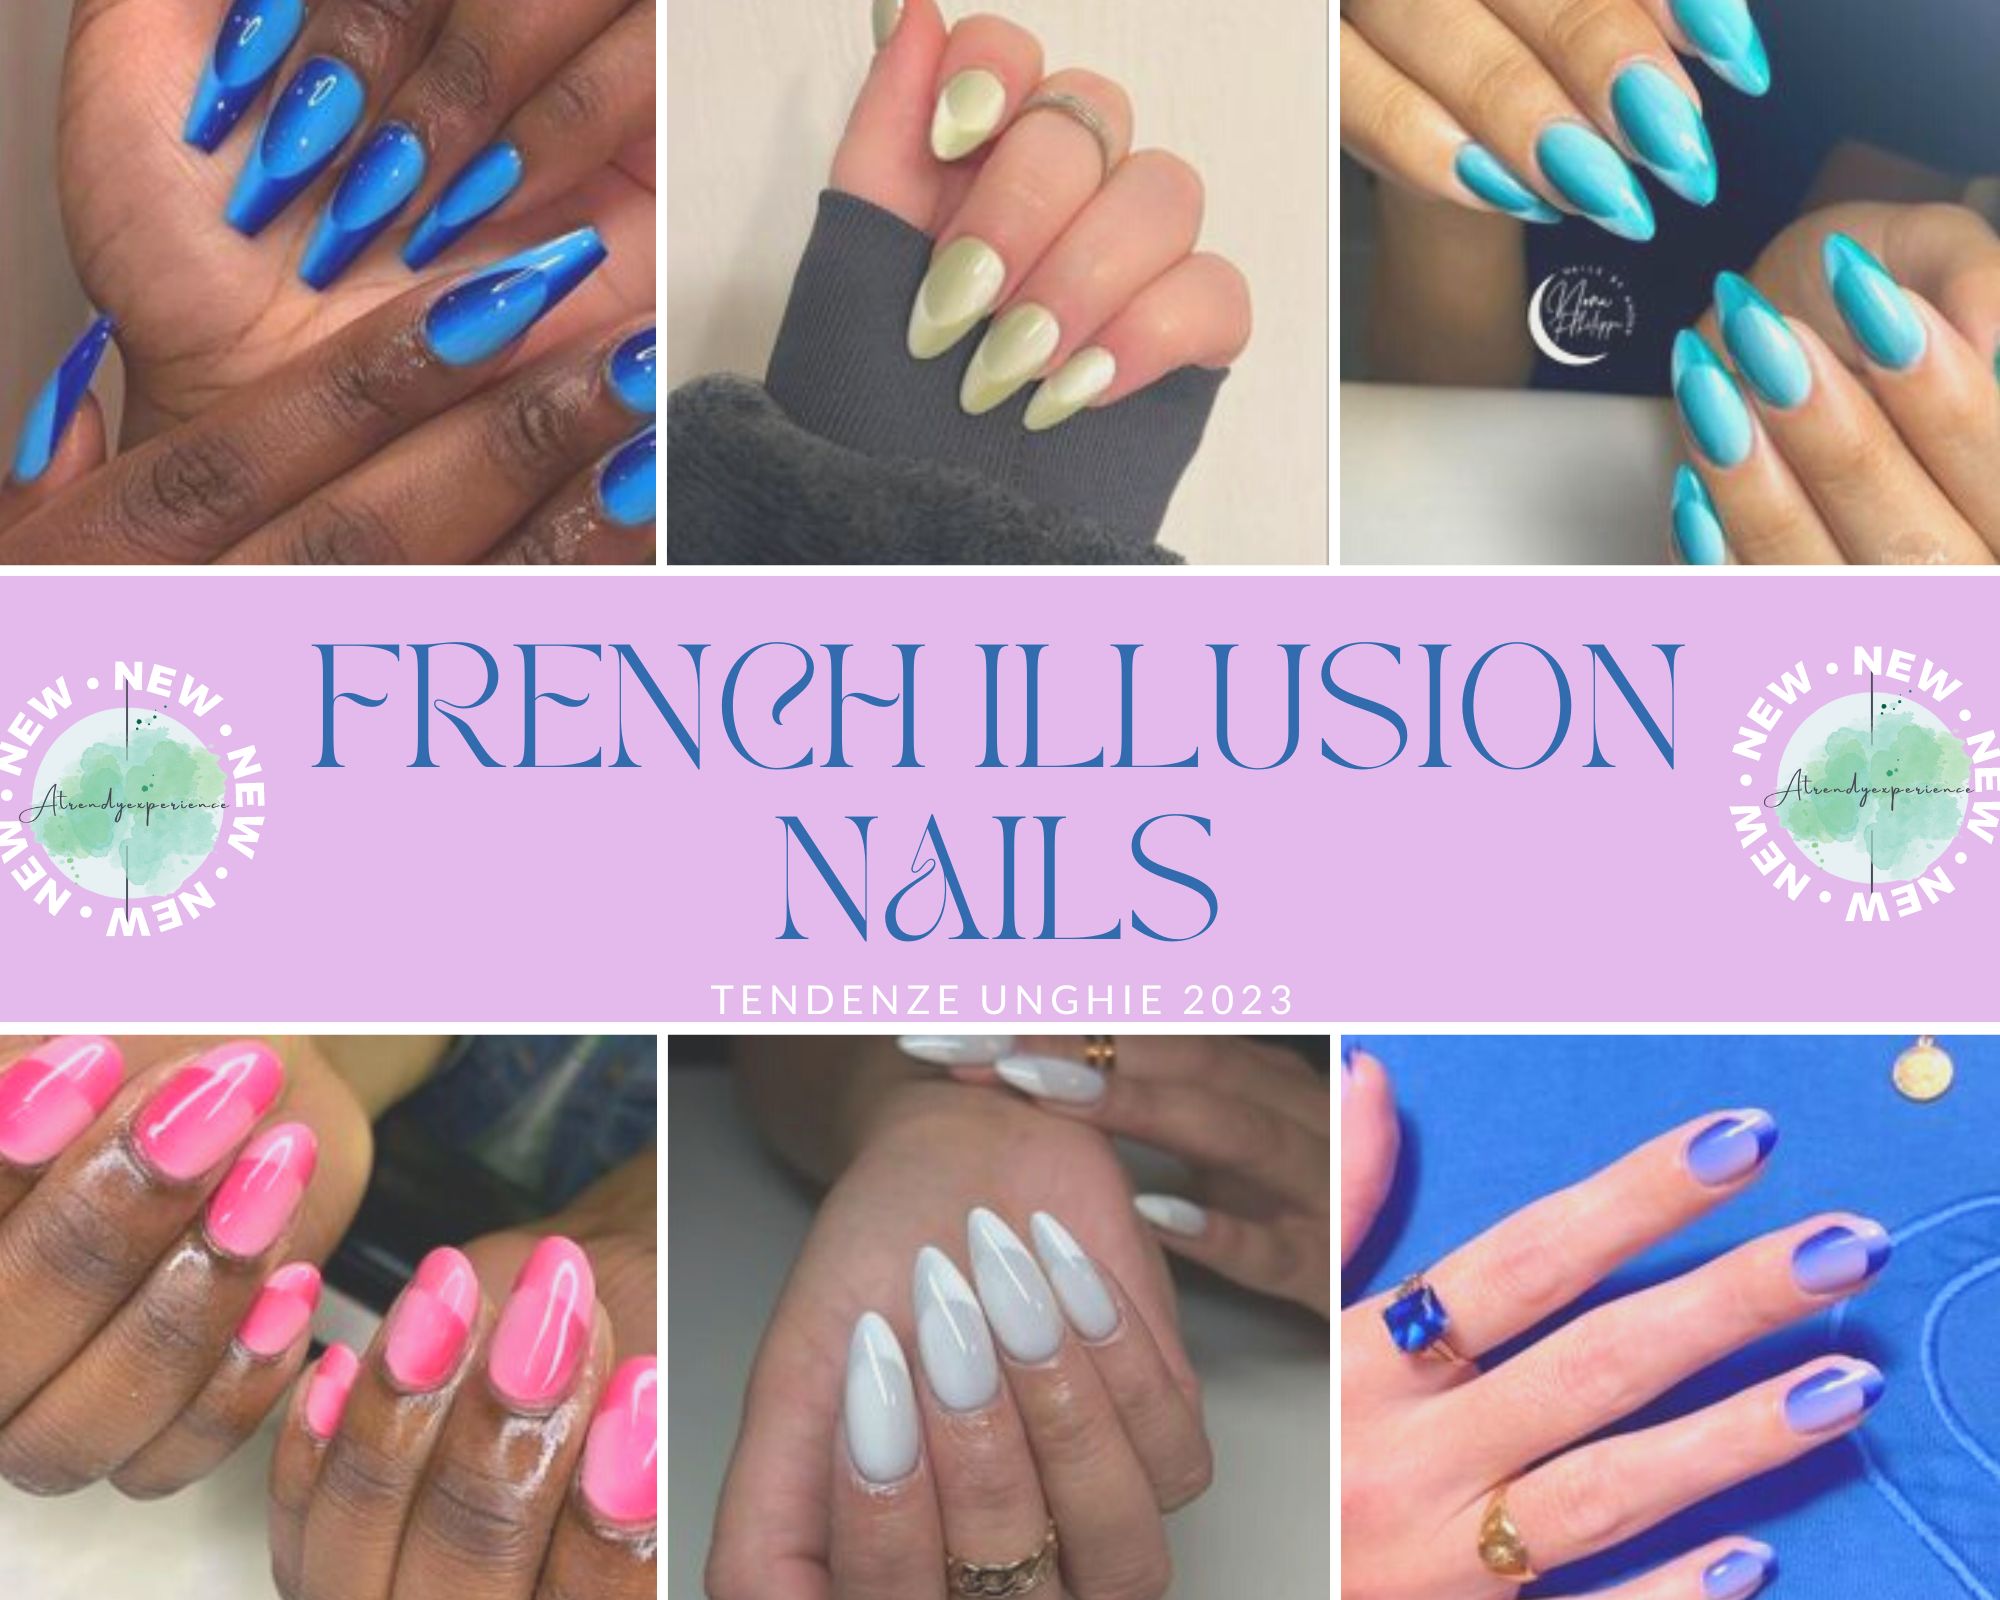 Tendenze unghie 2023: French Illusion Nails